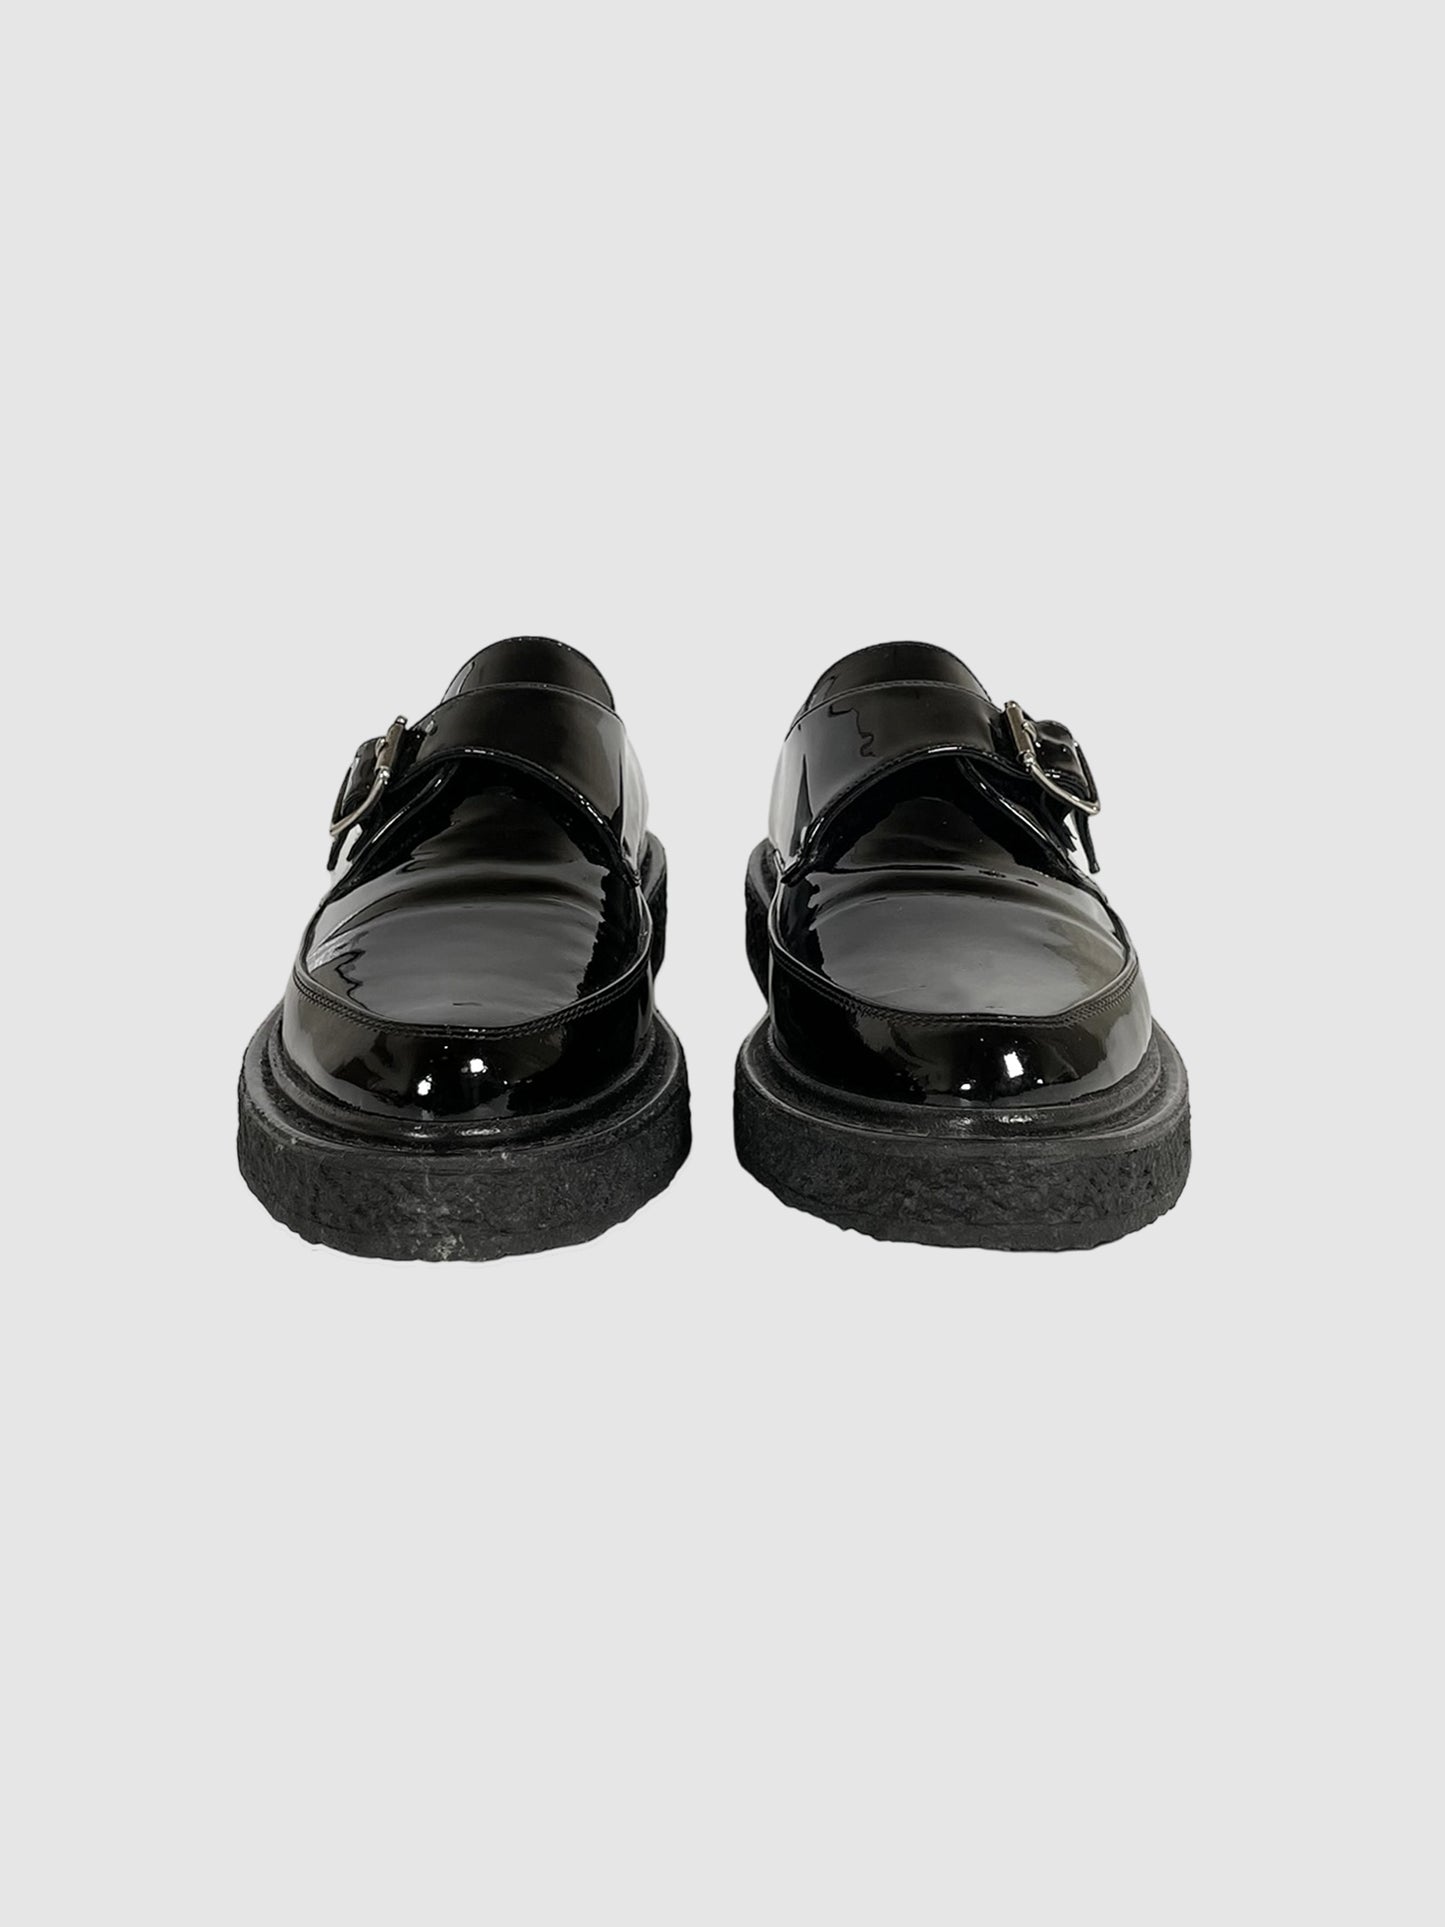 Saint Laurent Patent Leather Creepers - Size 39